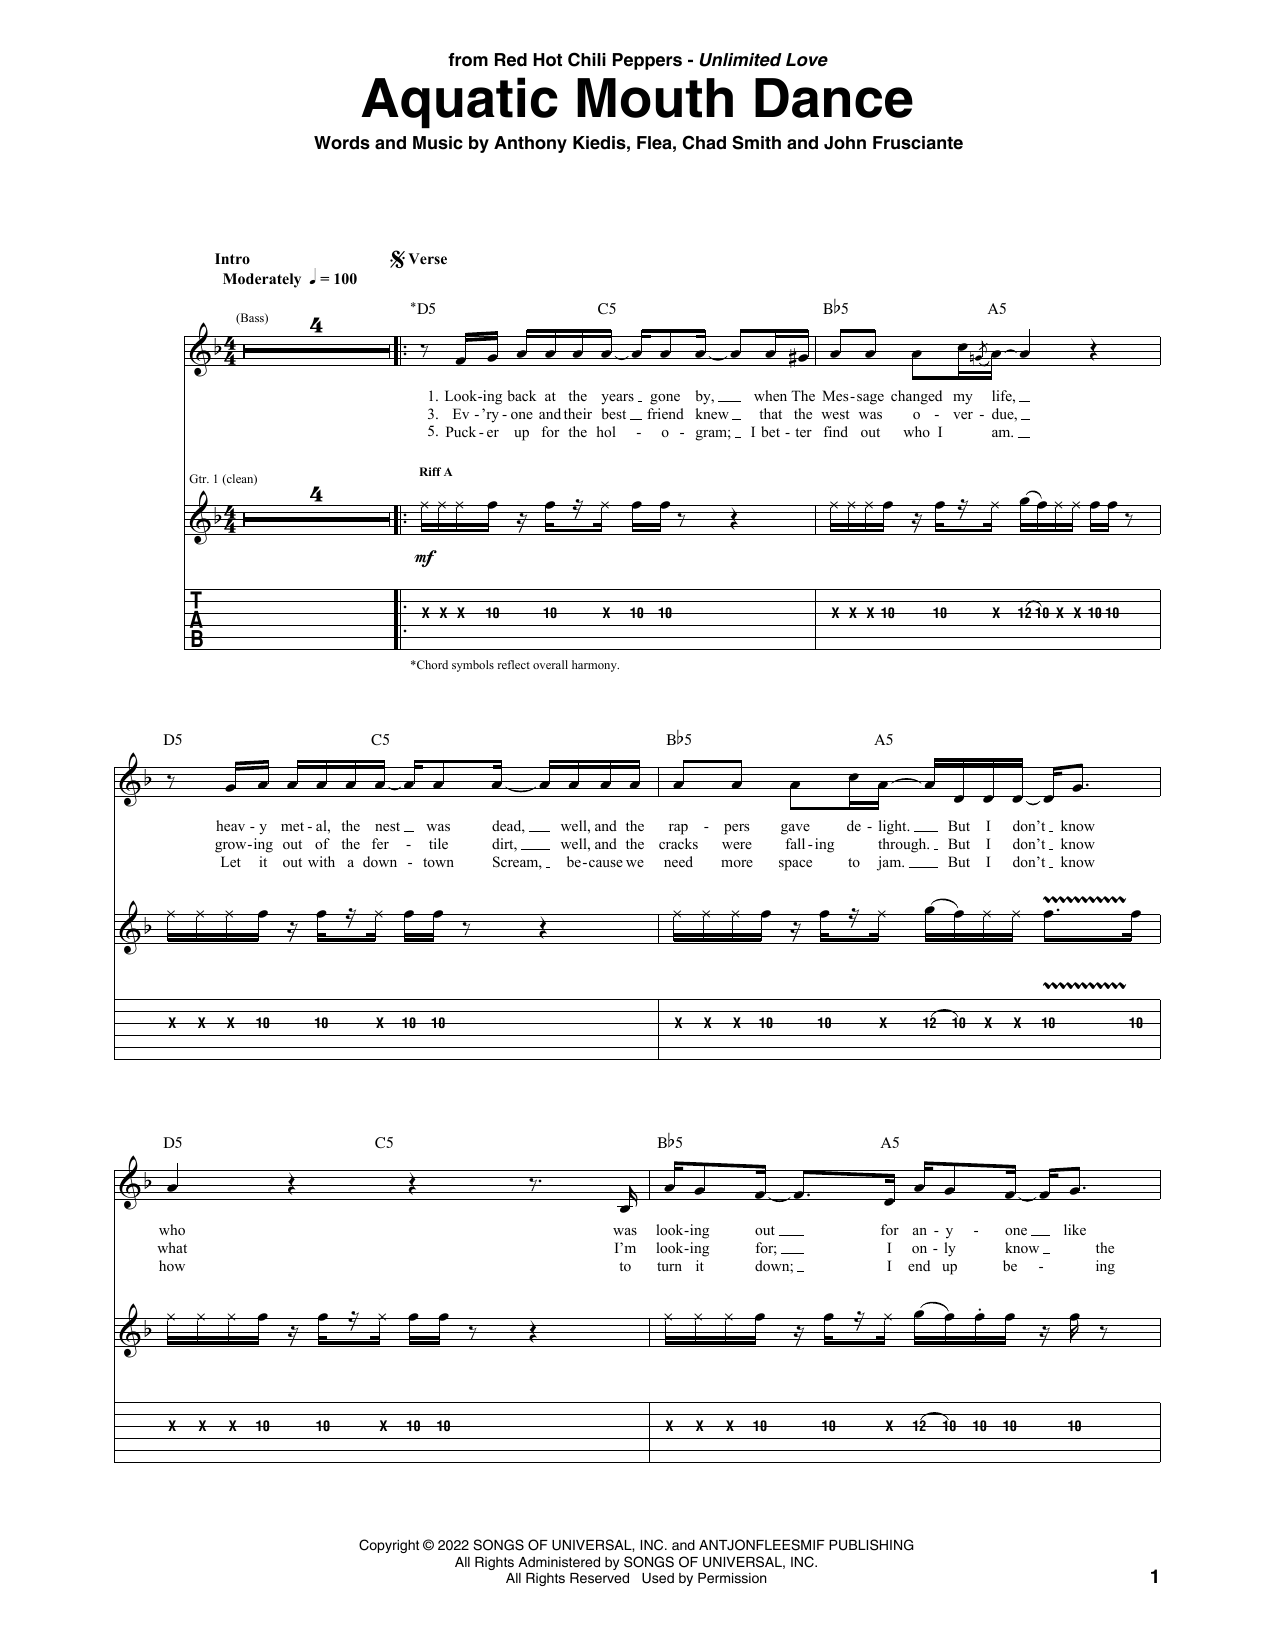 Download Red Hot Chili Peppers Aquatic Mouth Dance Sheet Music